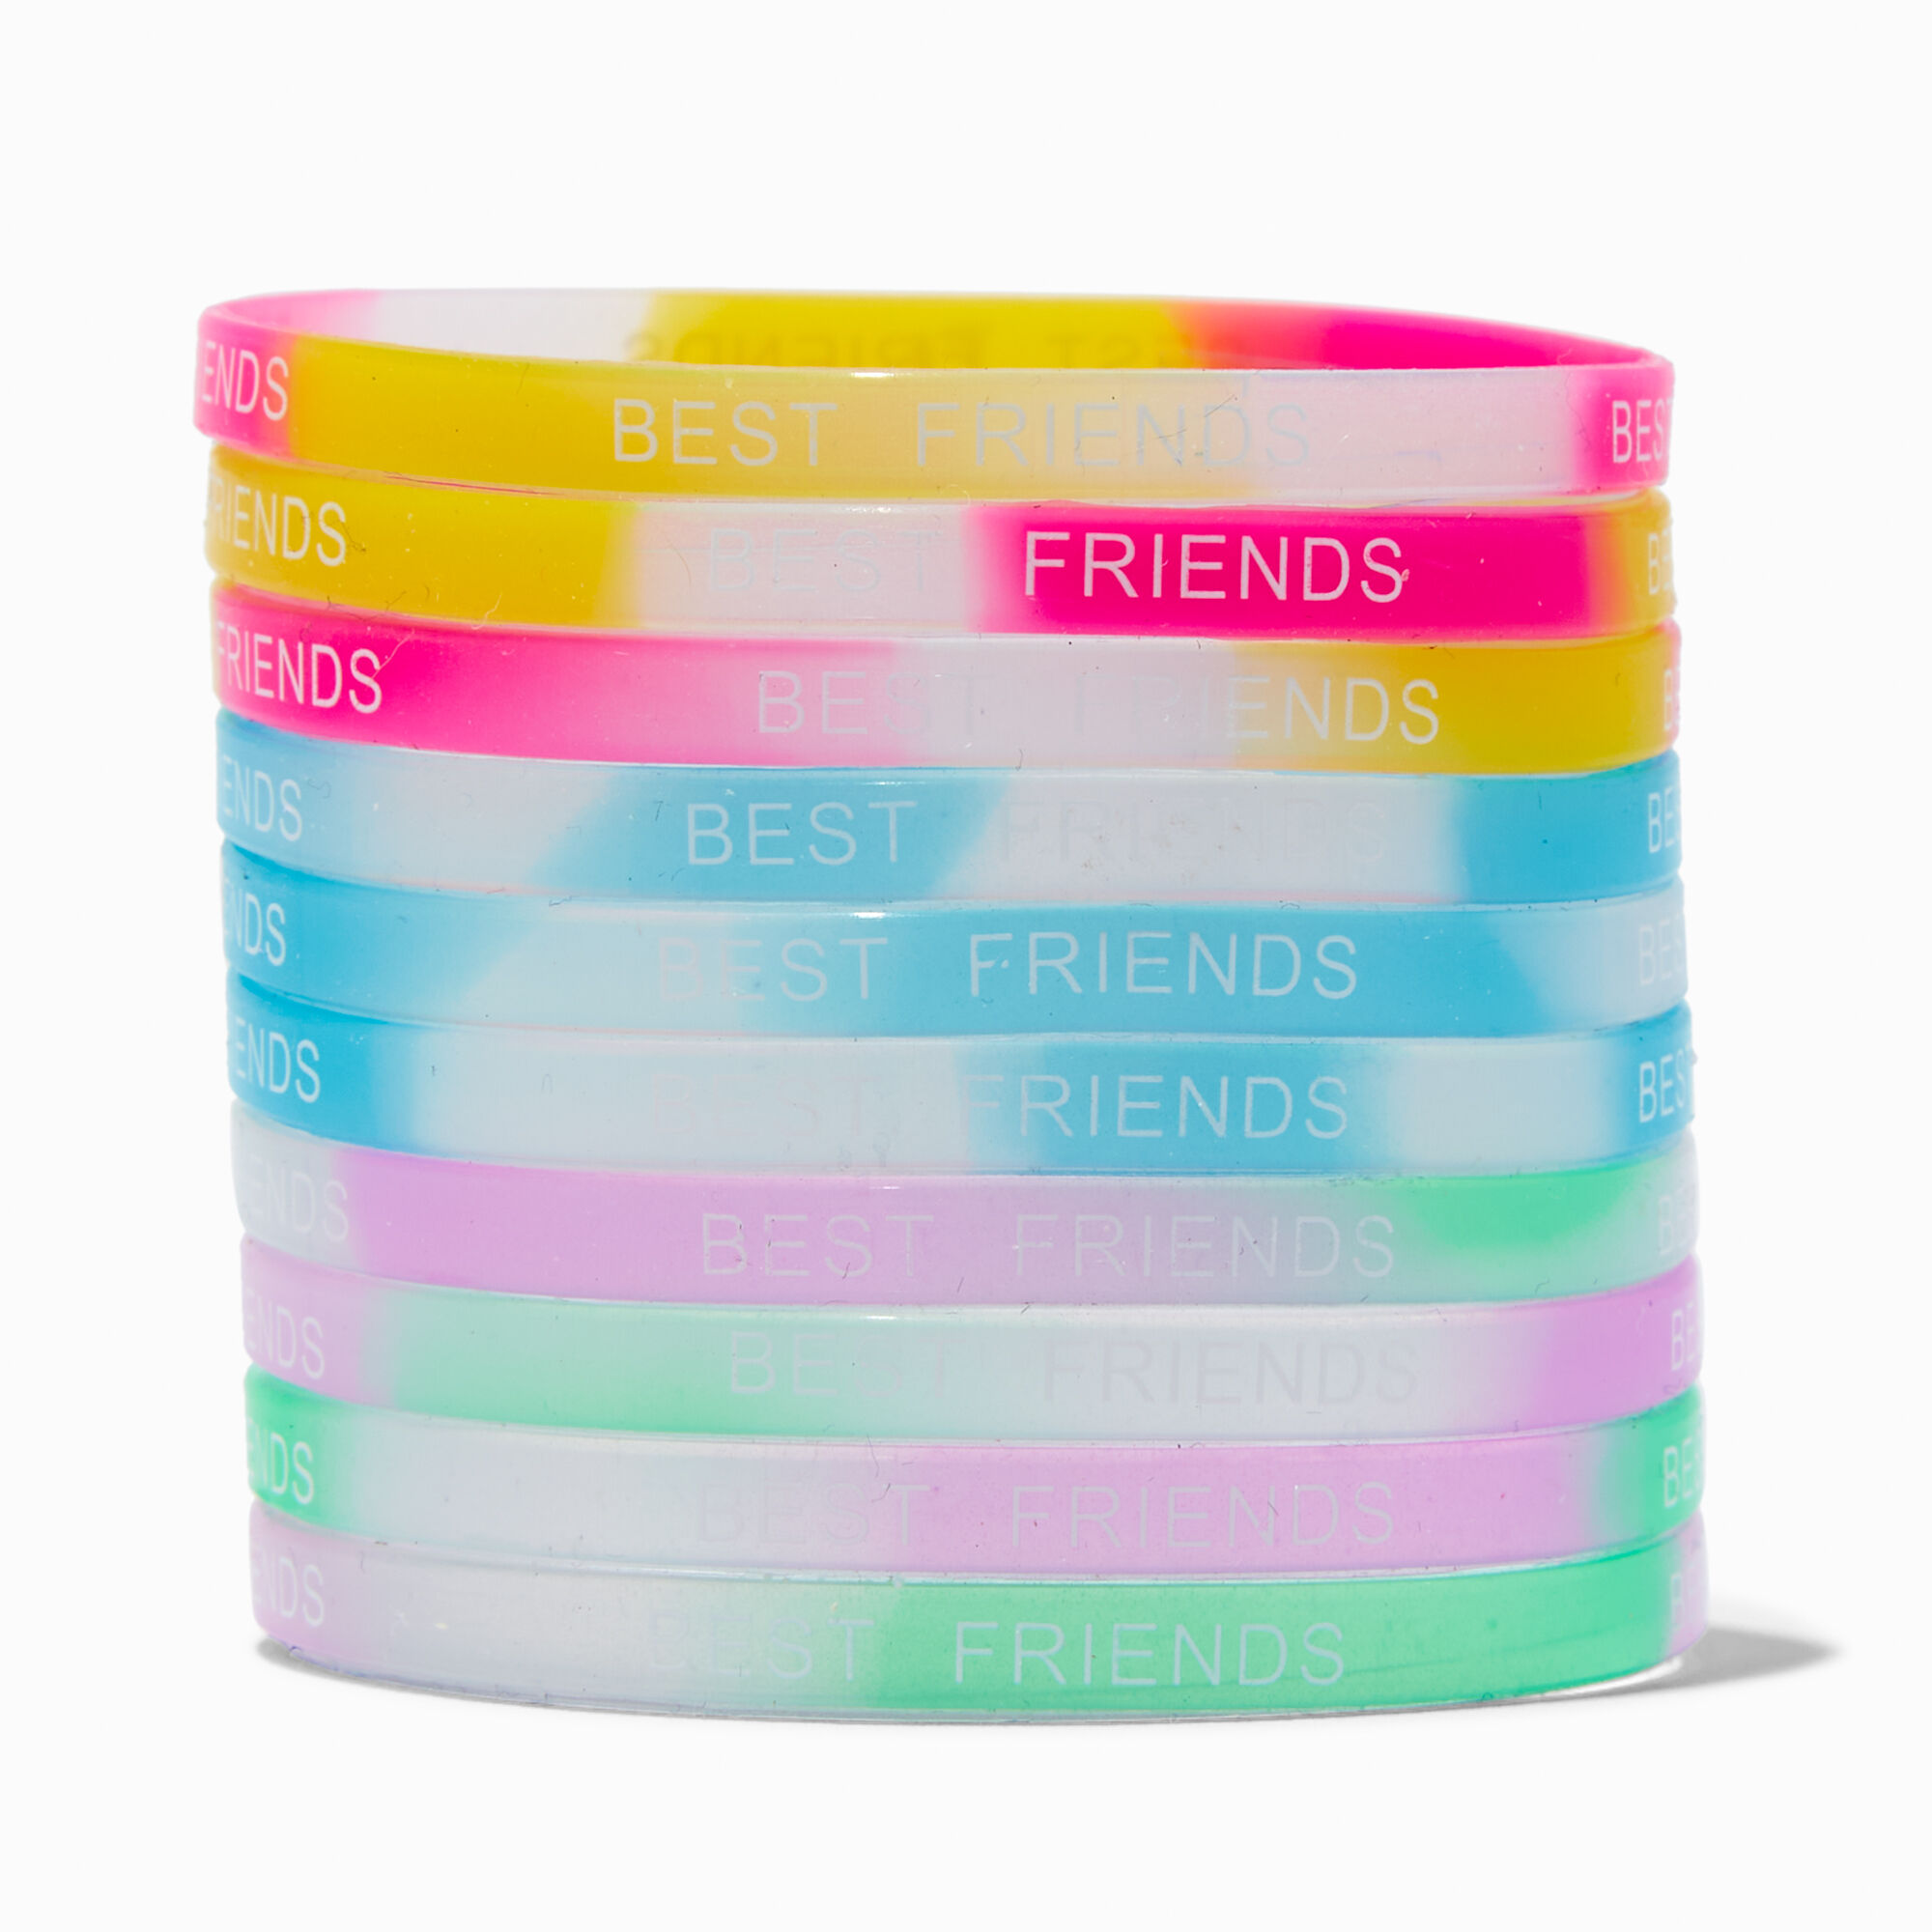 View Claires Best Friends Glow In The Dark Ombré Stretch Bracelets 10 Pack information